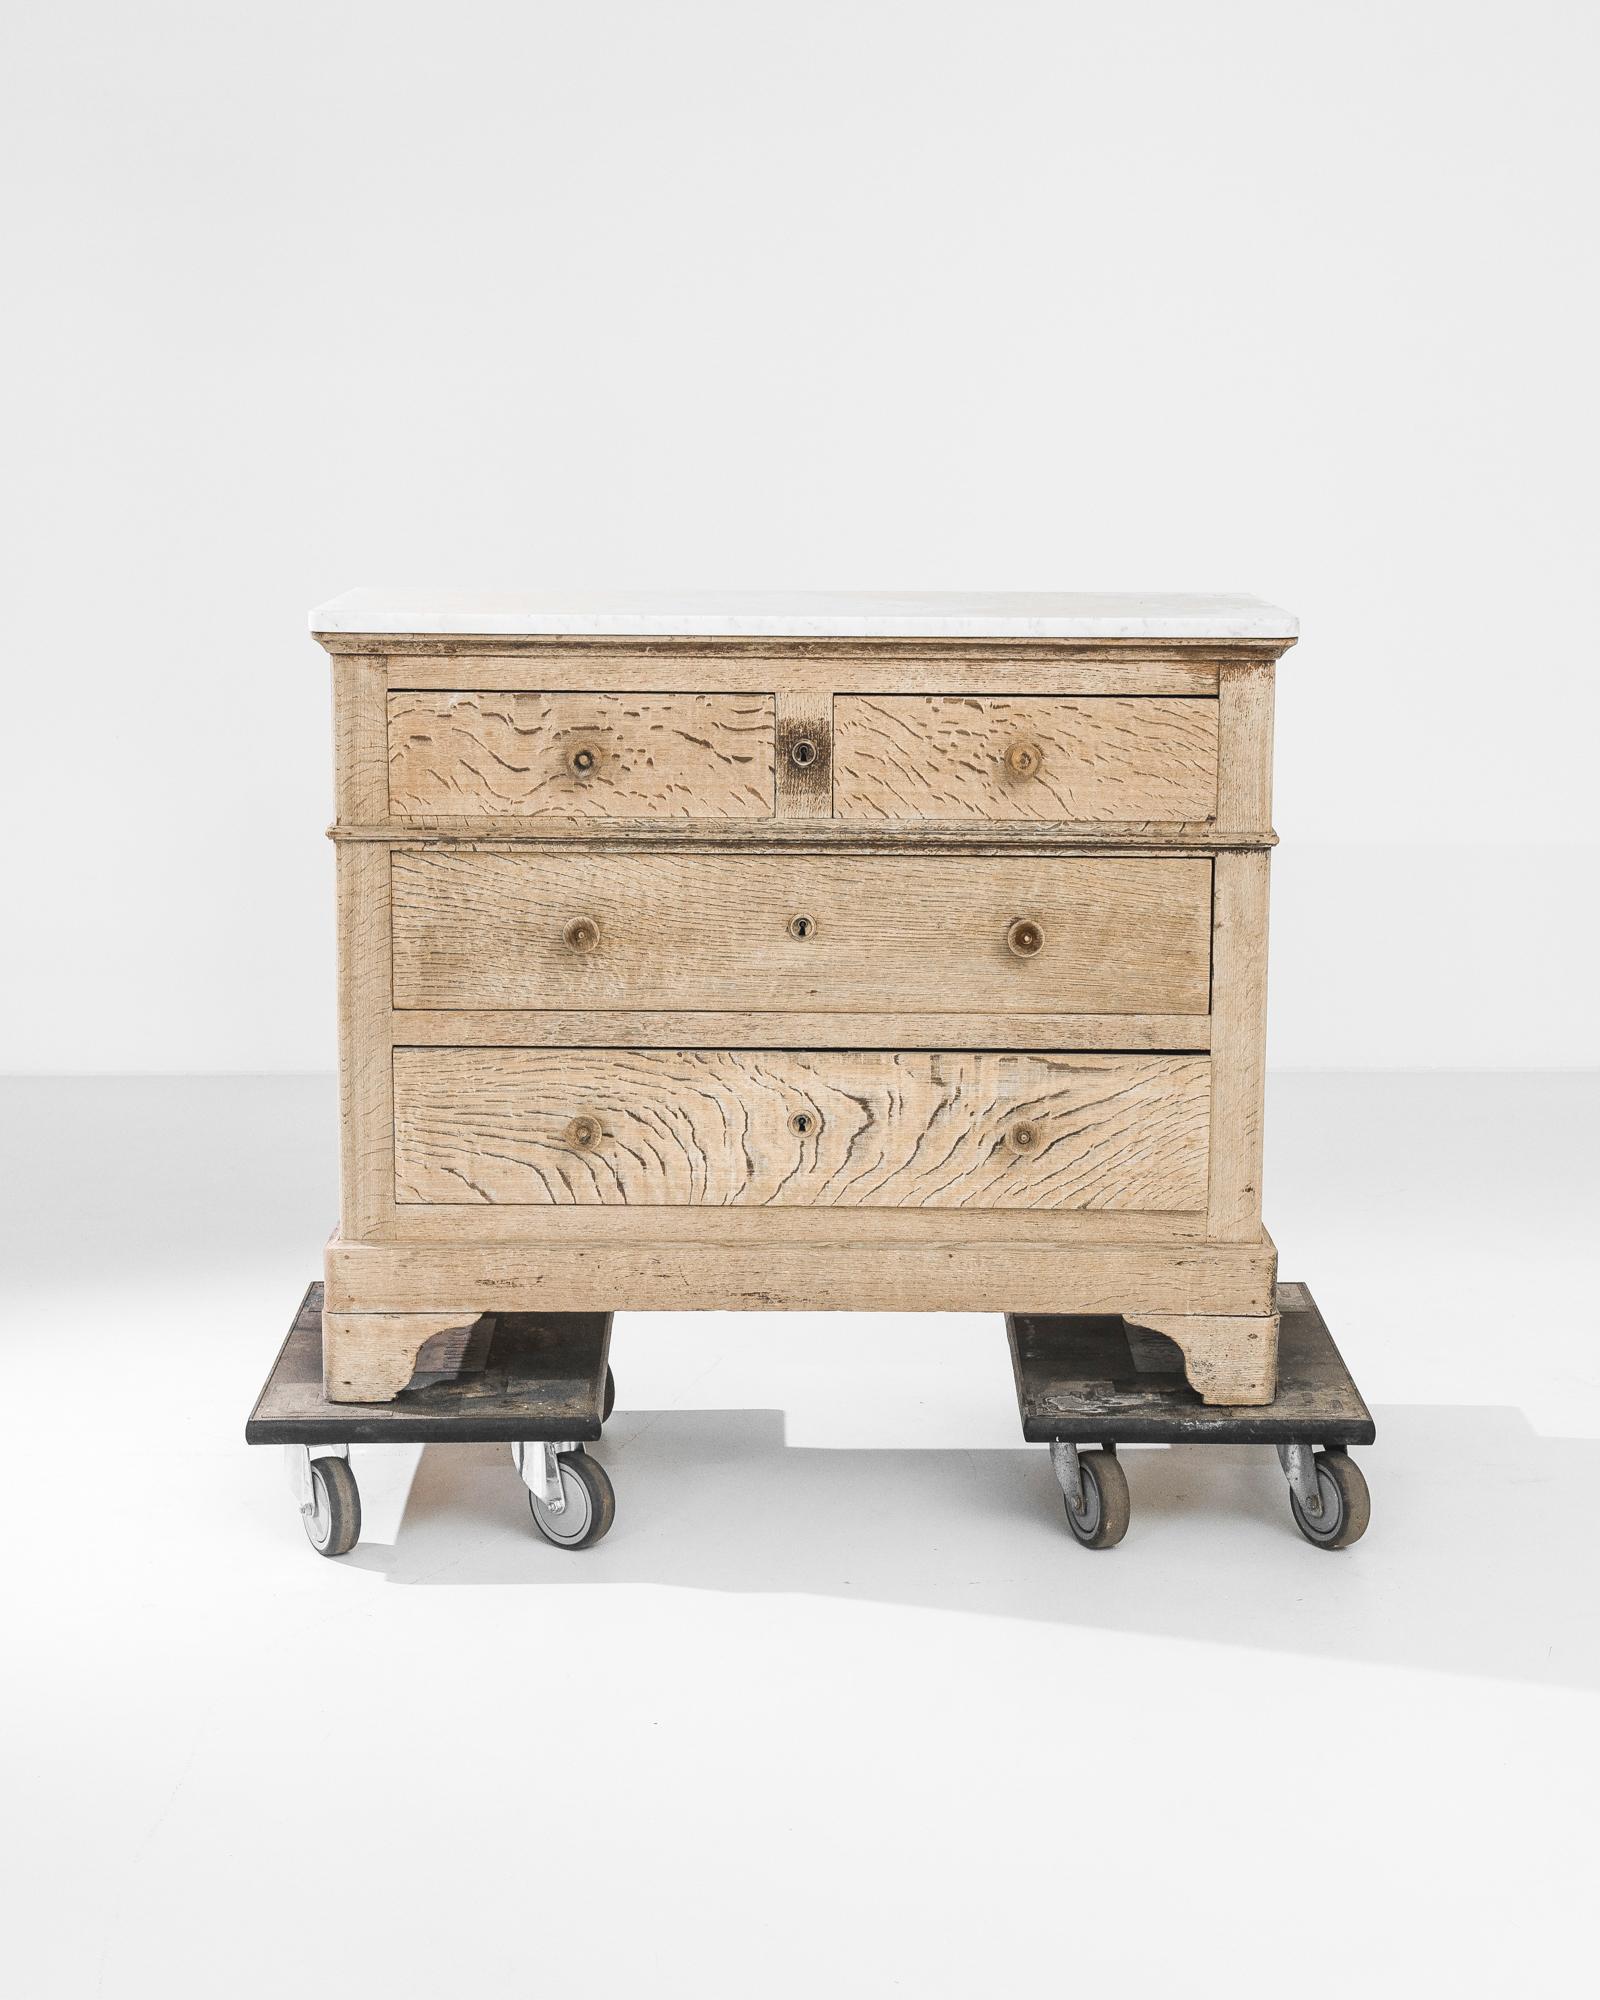 An oak chest of drawers from 1880s France, crowned by a piece of grey veined white marble. A handsome upright silhouette, elevated upon contoured feet. The oak has been restored in our workshops to a natural golden finish, exhibiting a fluid and